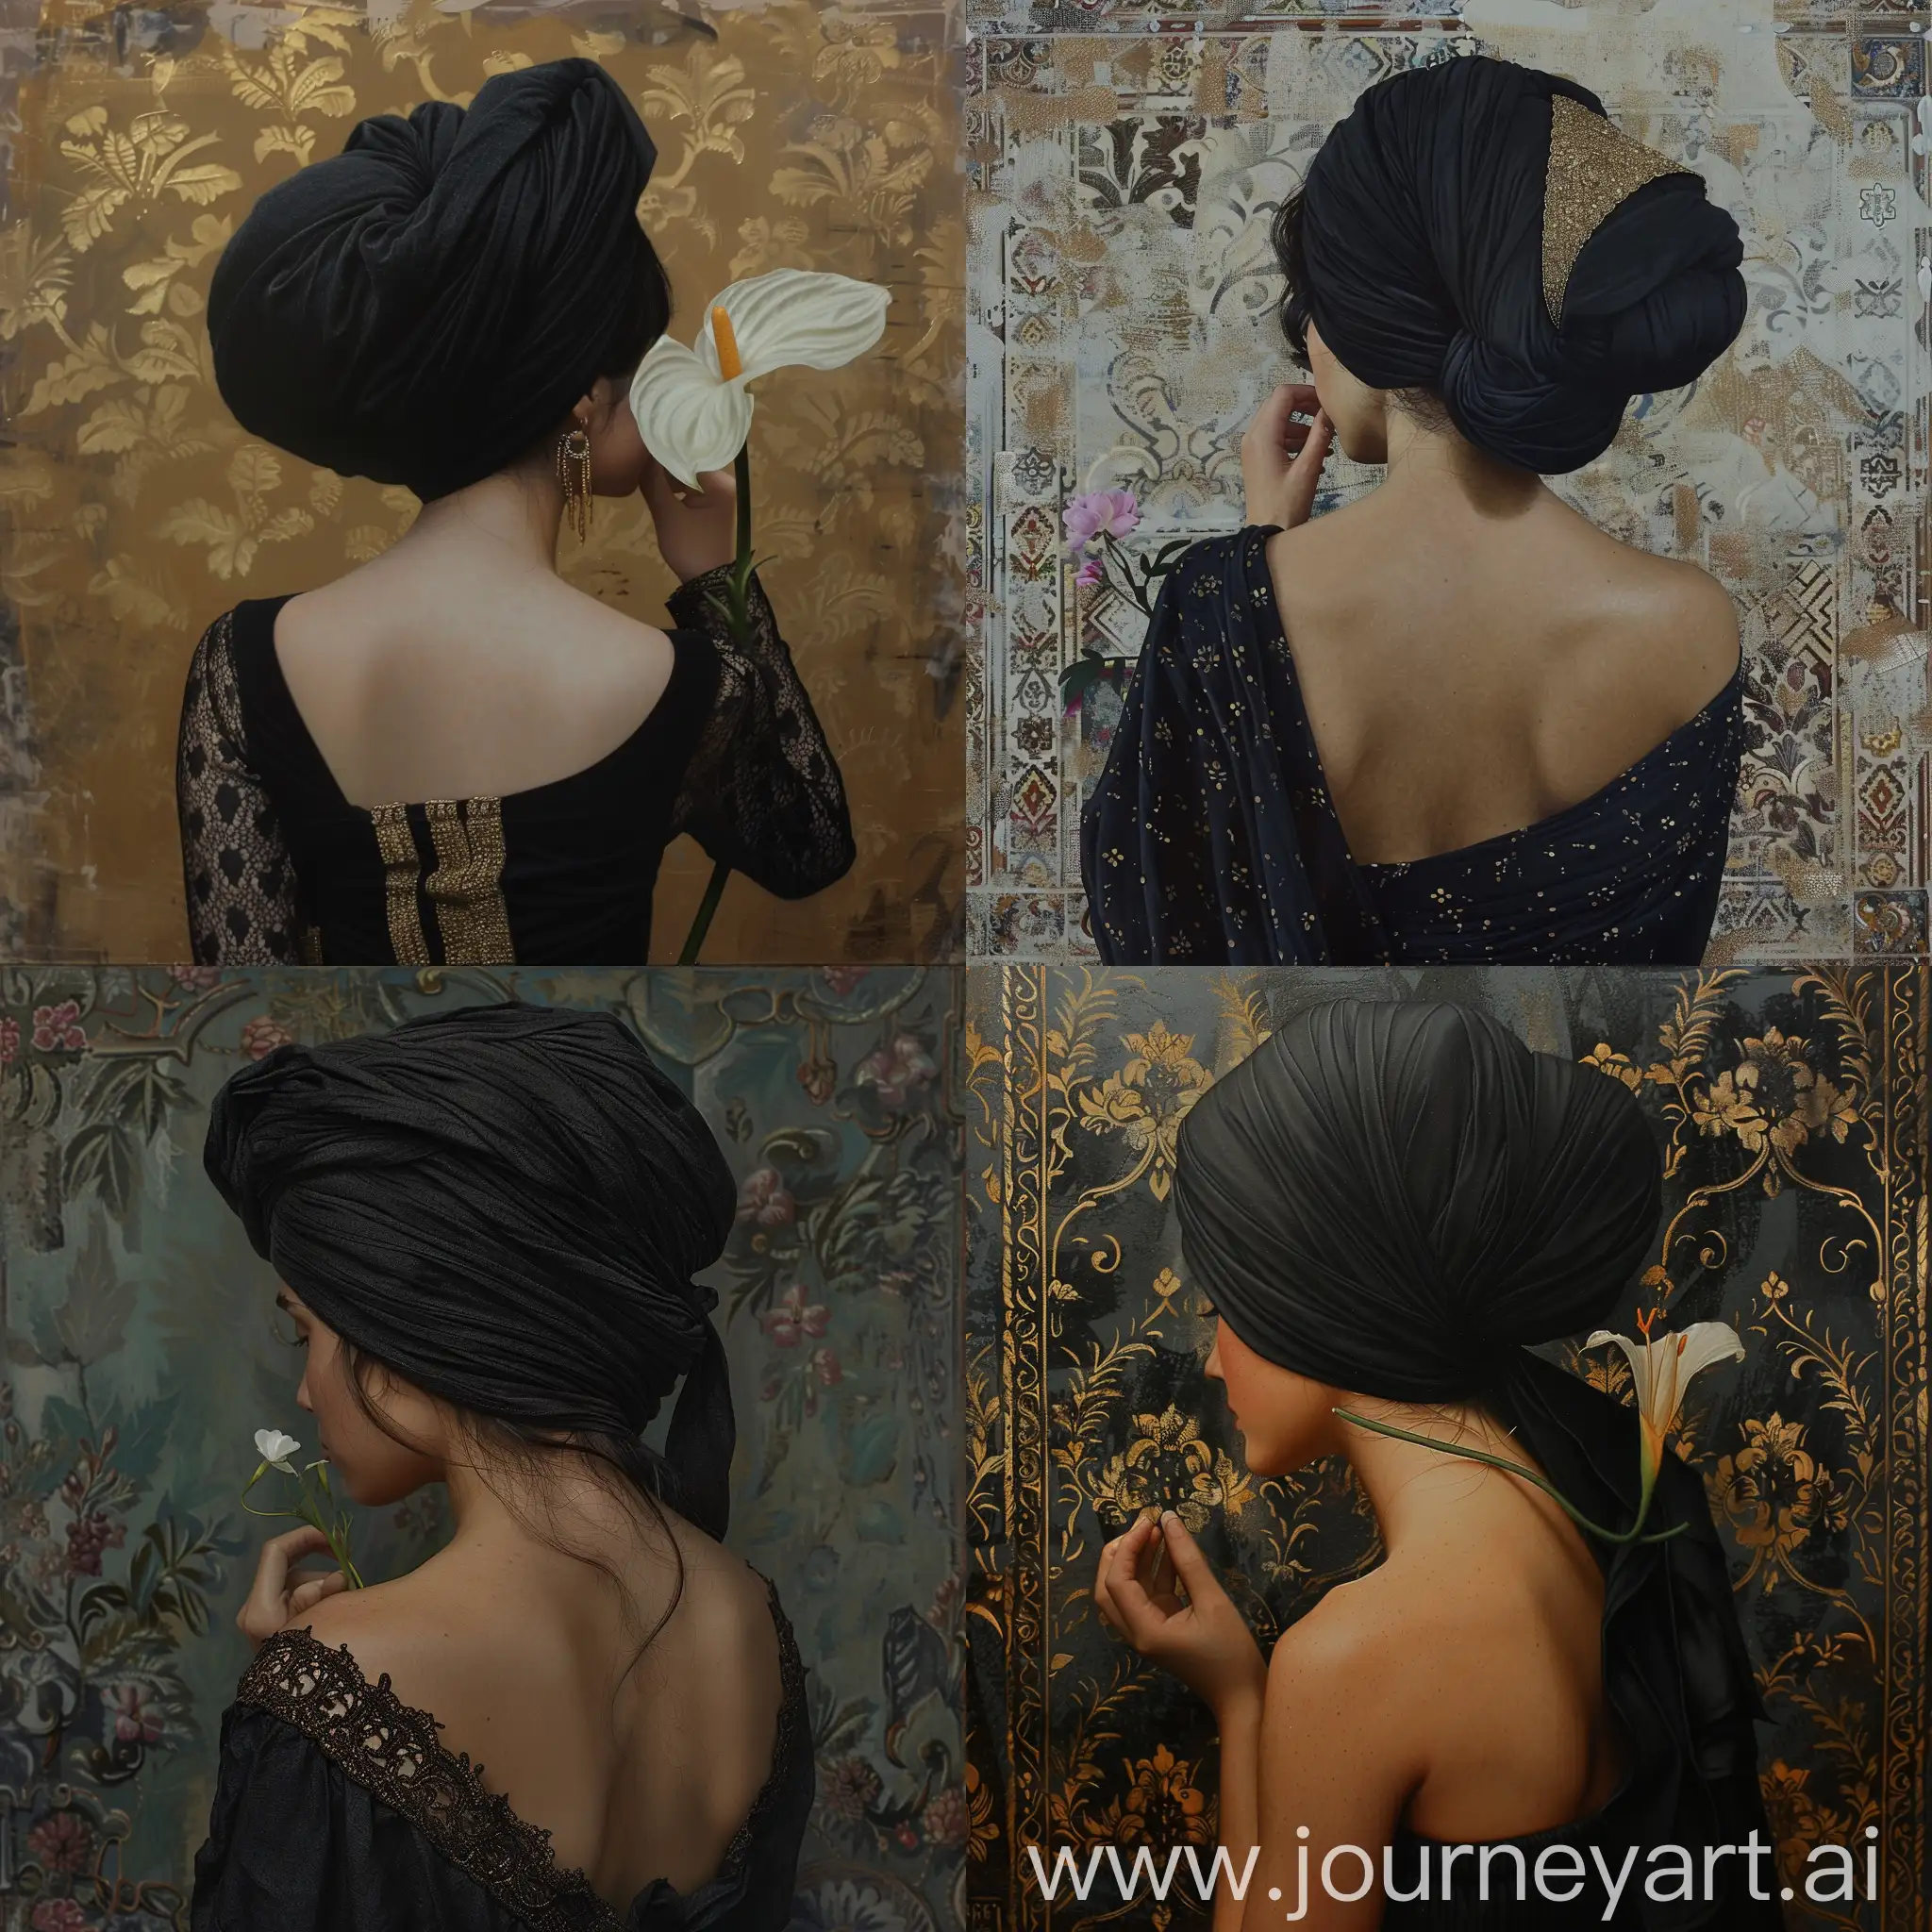 A girl in a black turban, about 25 years old, has her back and is smelling a flower.